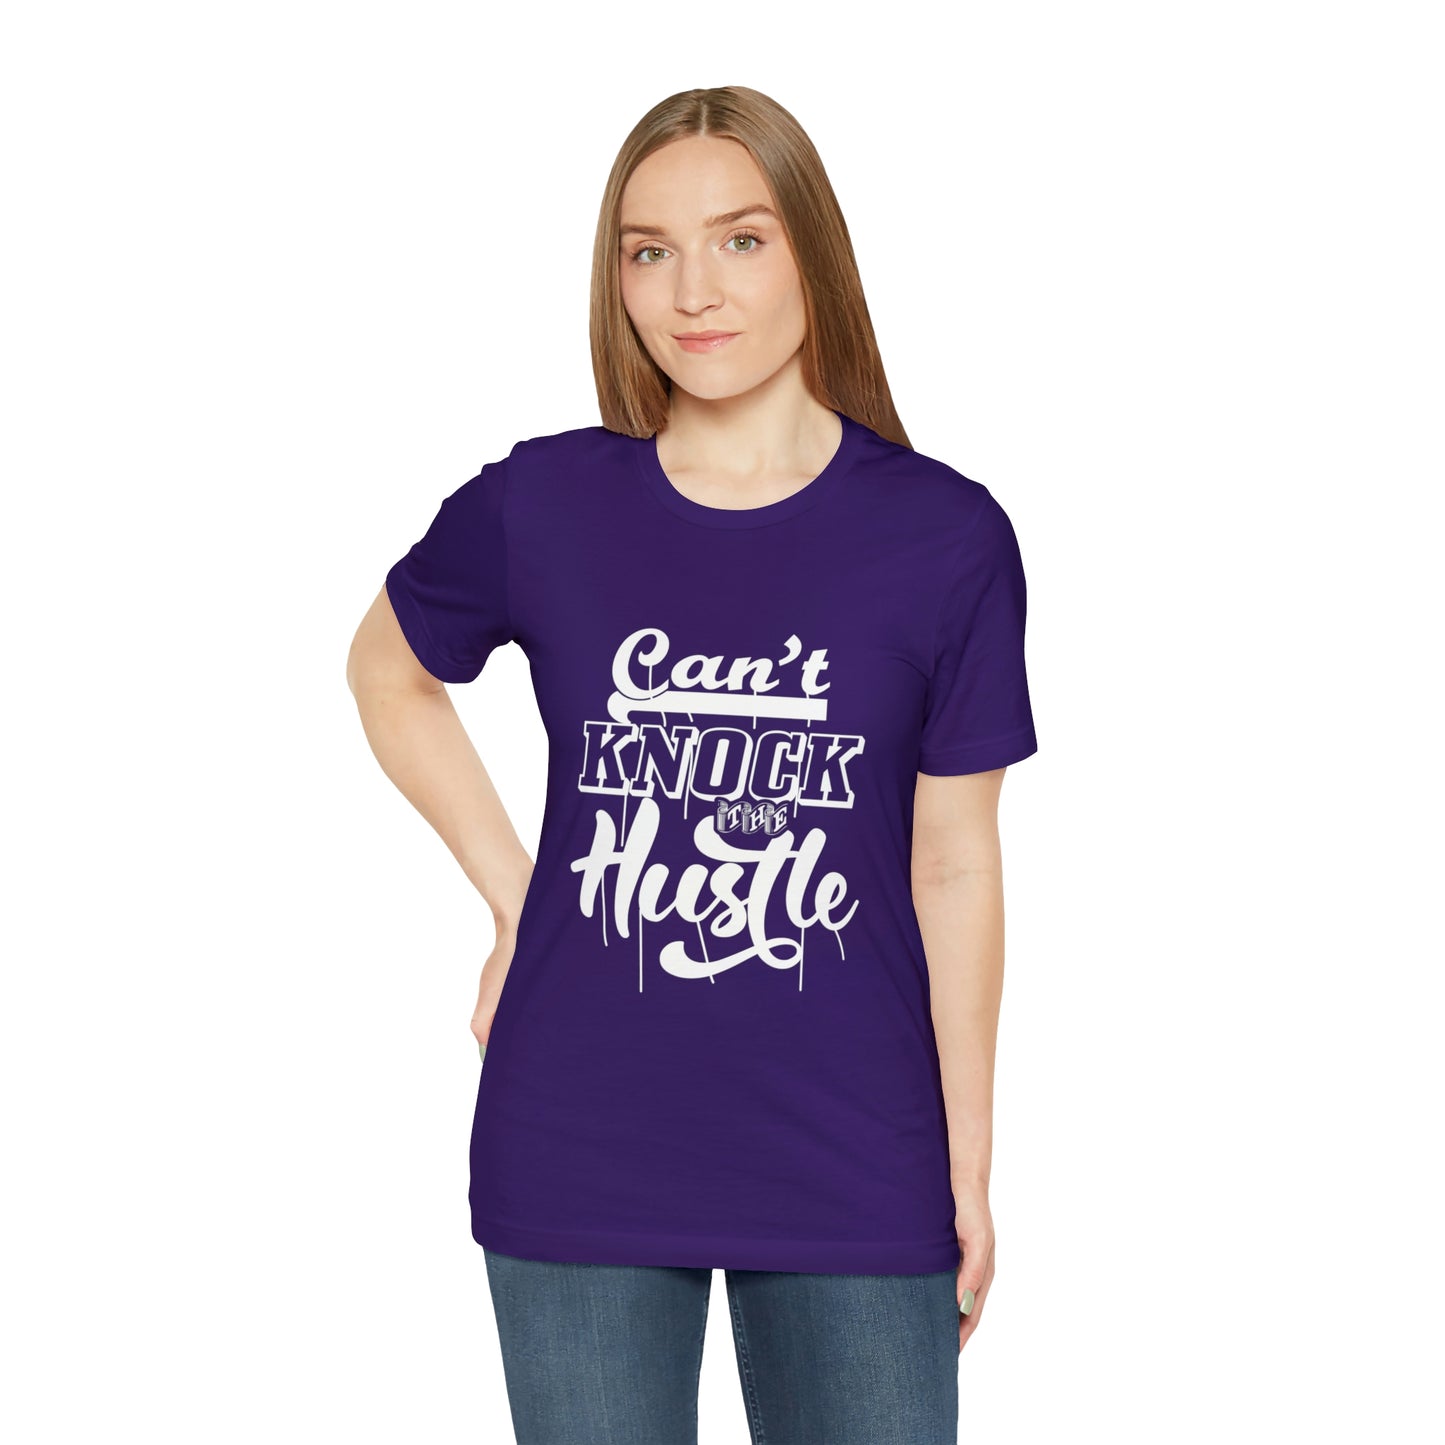 CAN'T KNOCK THE HUSTLE Unisex Jersey Short Sleeve Tee